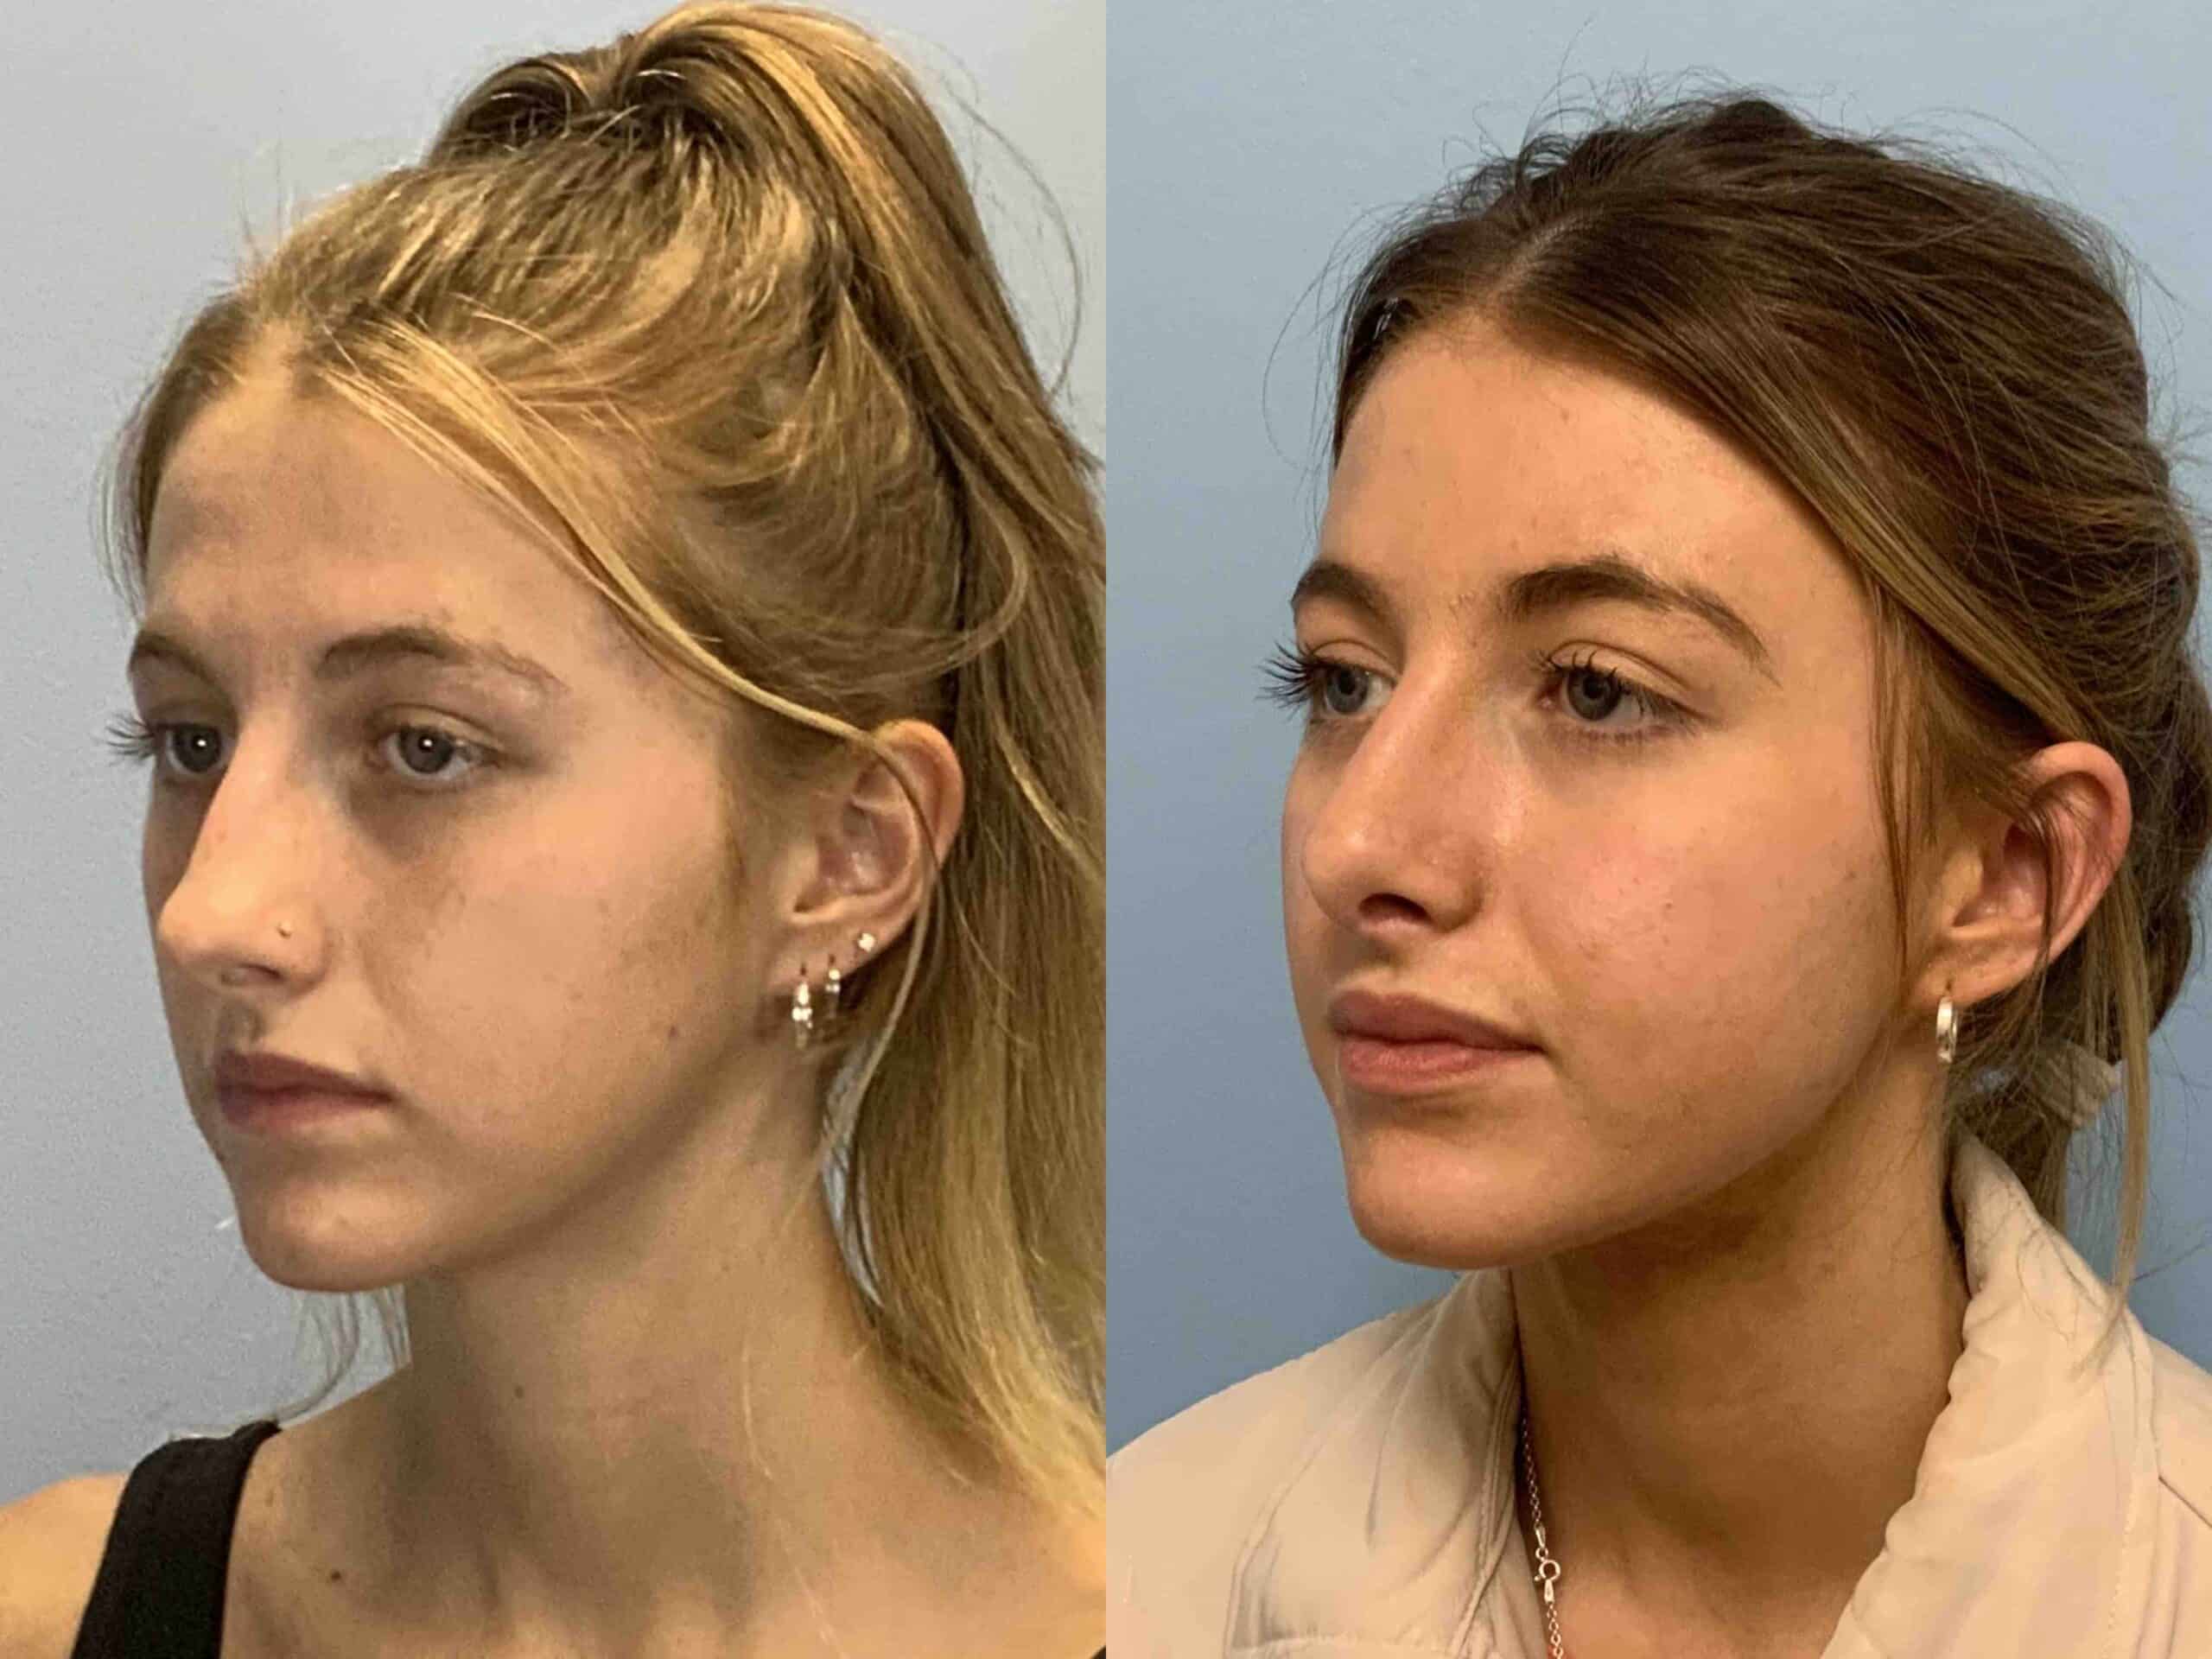 Before and after, 4 mo post op from Rhinoplasty and Septoplasty performed by Dr. Paul Vanek